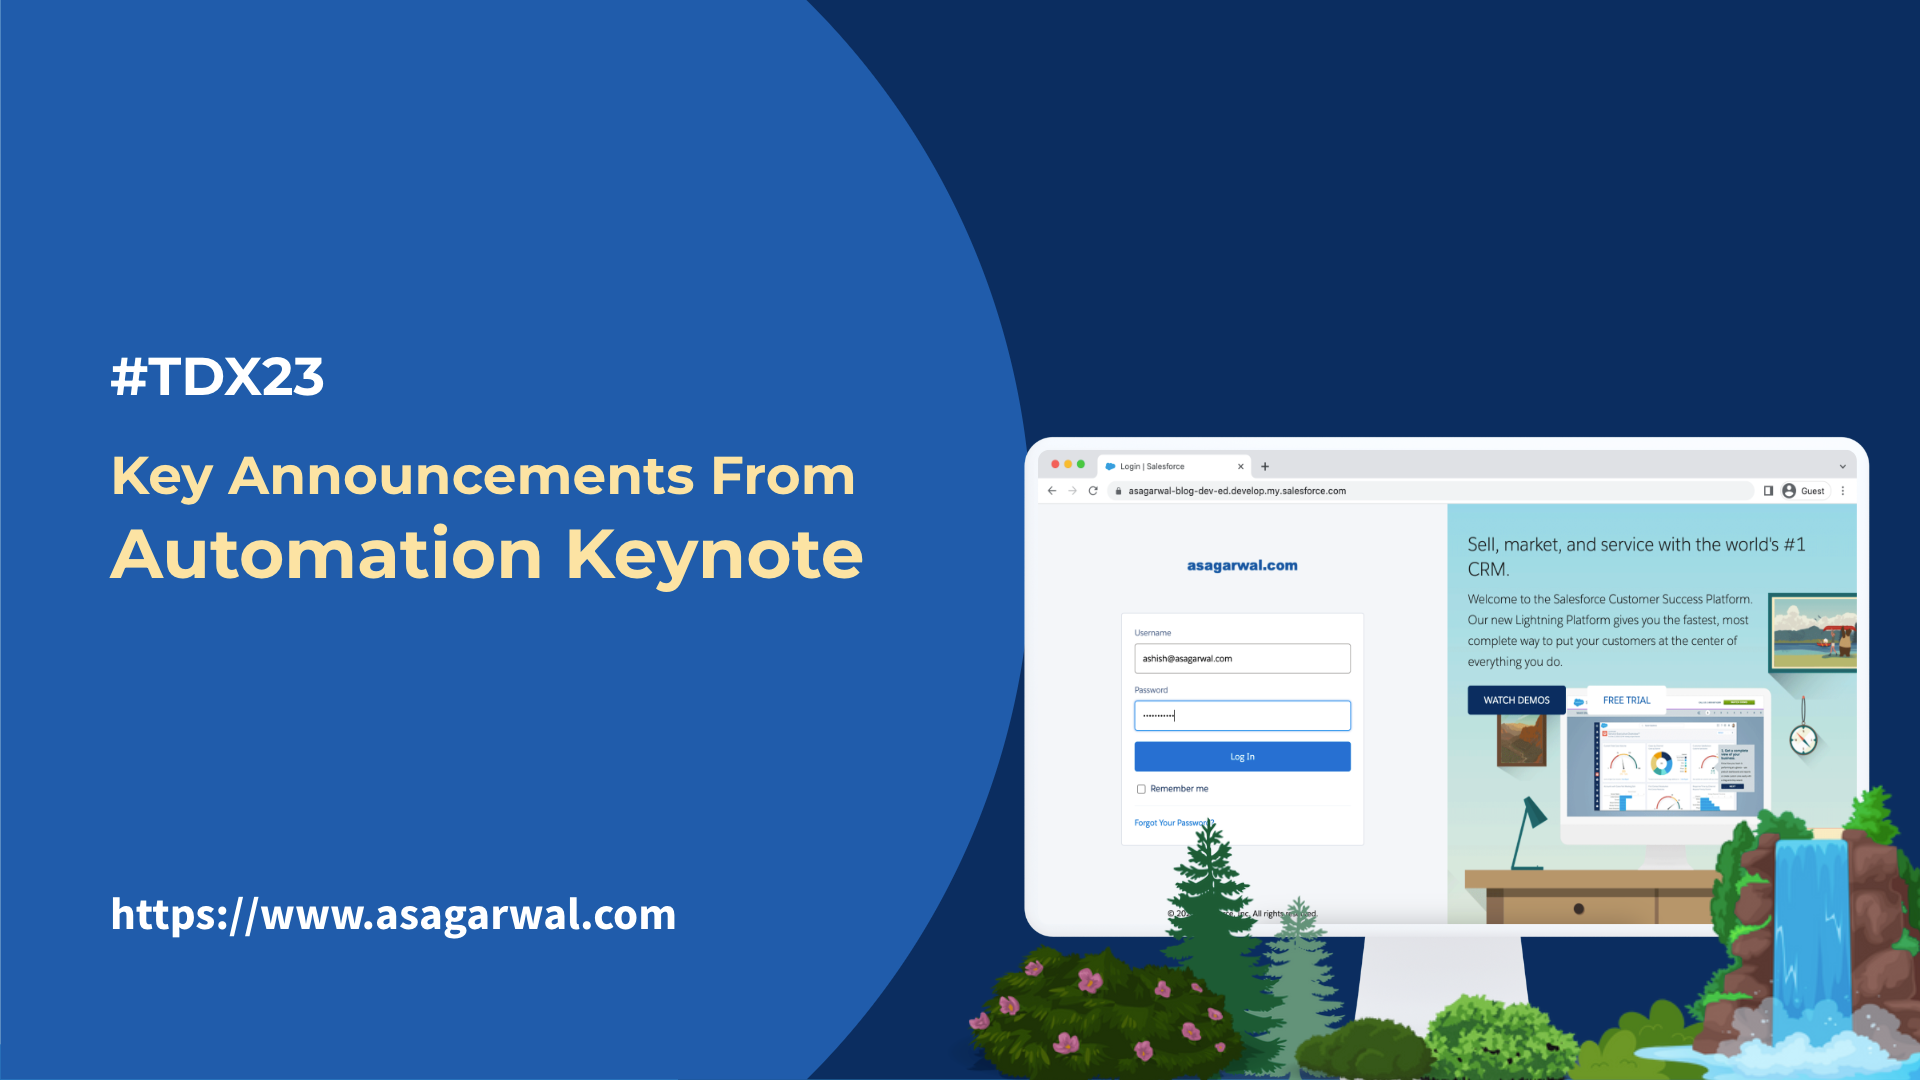 #TDX23 - Key Announcements from Automation Keynote